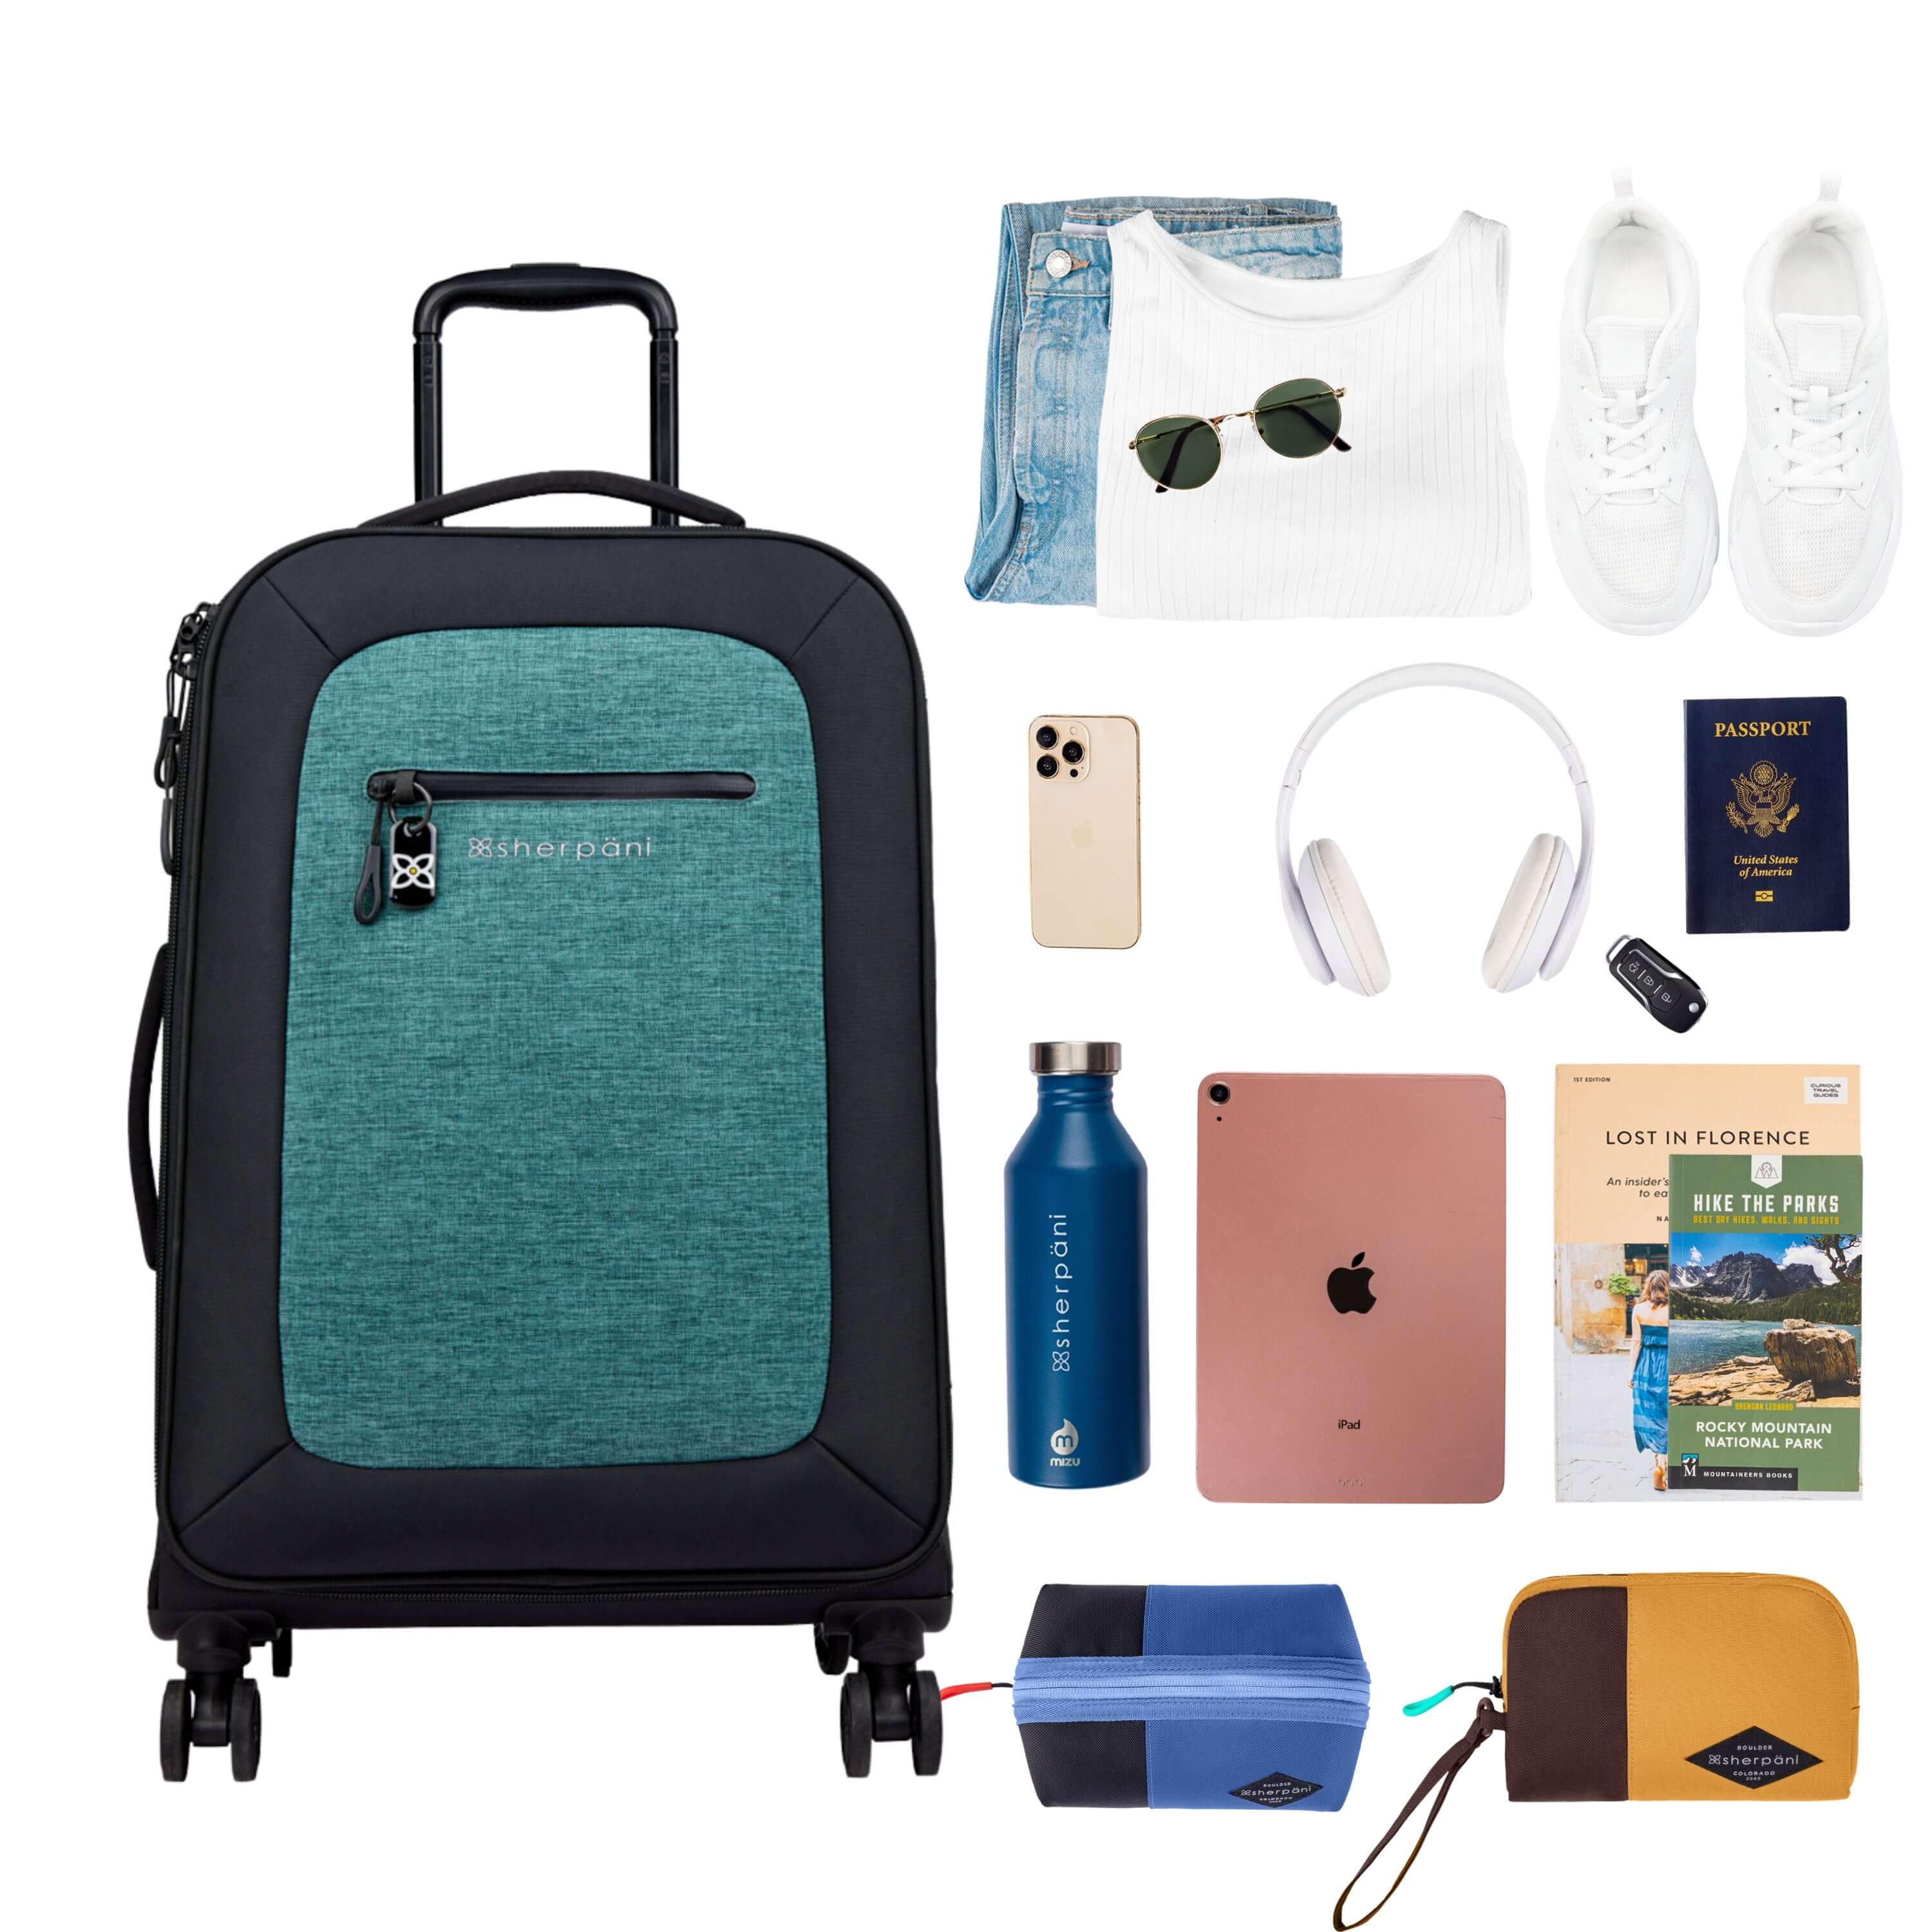 Top view of example items to fill the suitcase. On the left lies Sherpani’s Anti-Theft luggage, the Hemisphere in Teal. On the right lies an assortment of items: change of clothes, sunglasses, sneakers, phone, headphones, car key, passport, water bottle, tablet, travel books, Sherpani travel accessories, the Harmony in Pacific Blue and the Jolie in Sundial. 